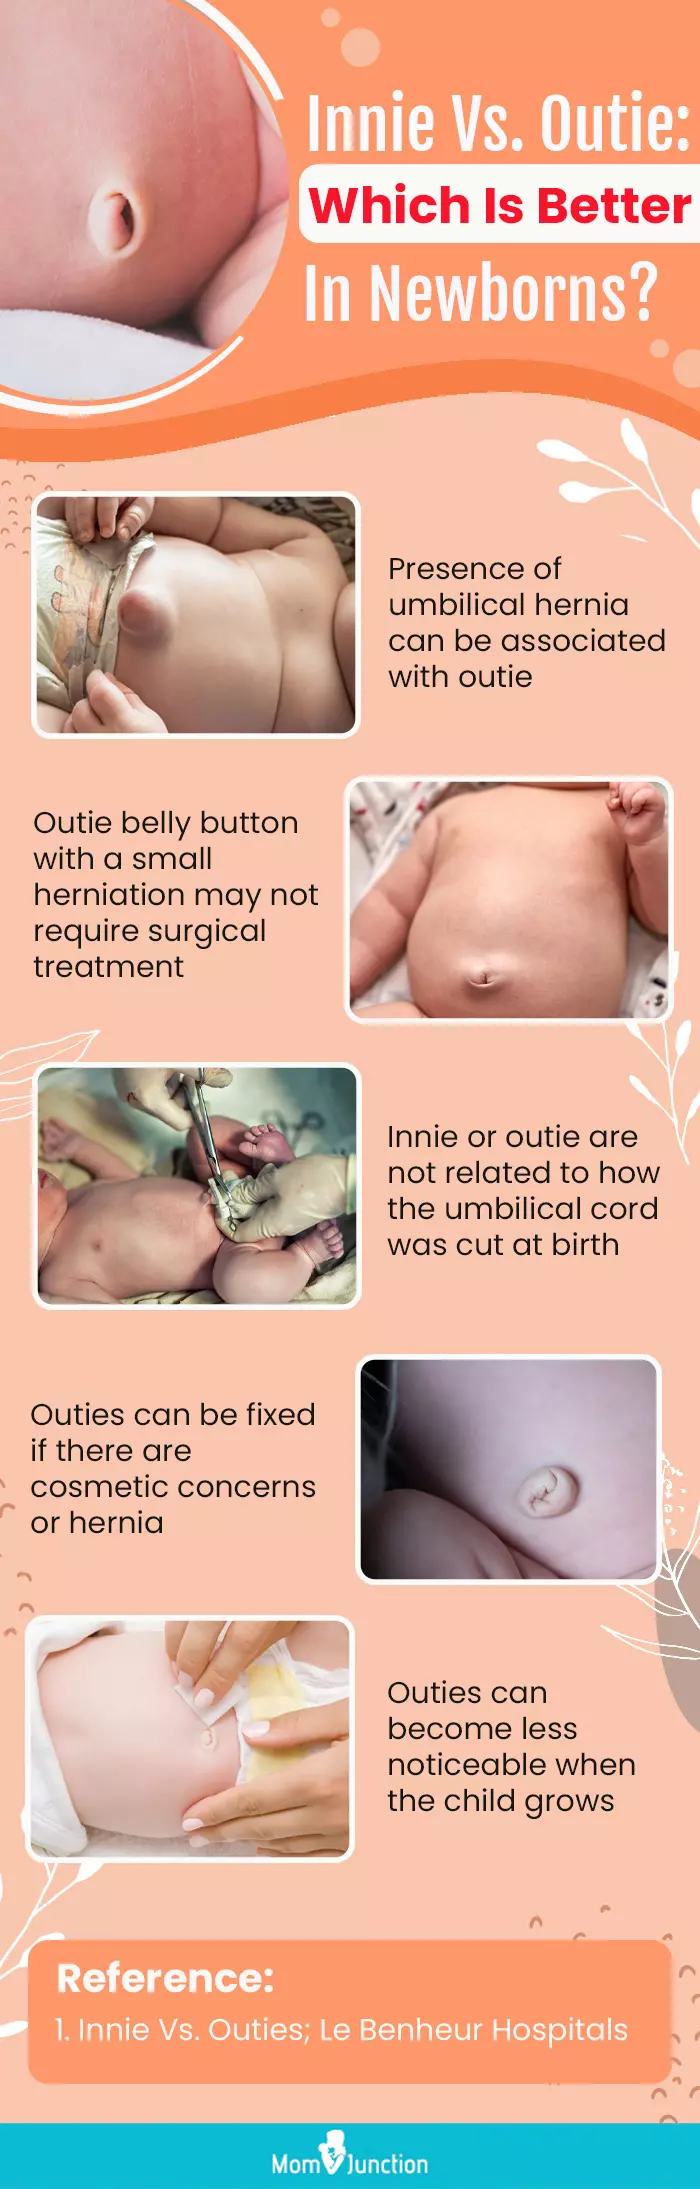 innie vs. outie which is better in newborns (infographic)